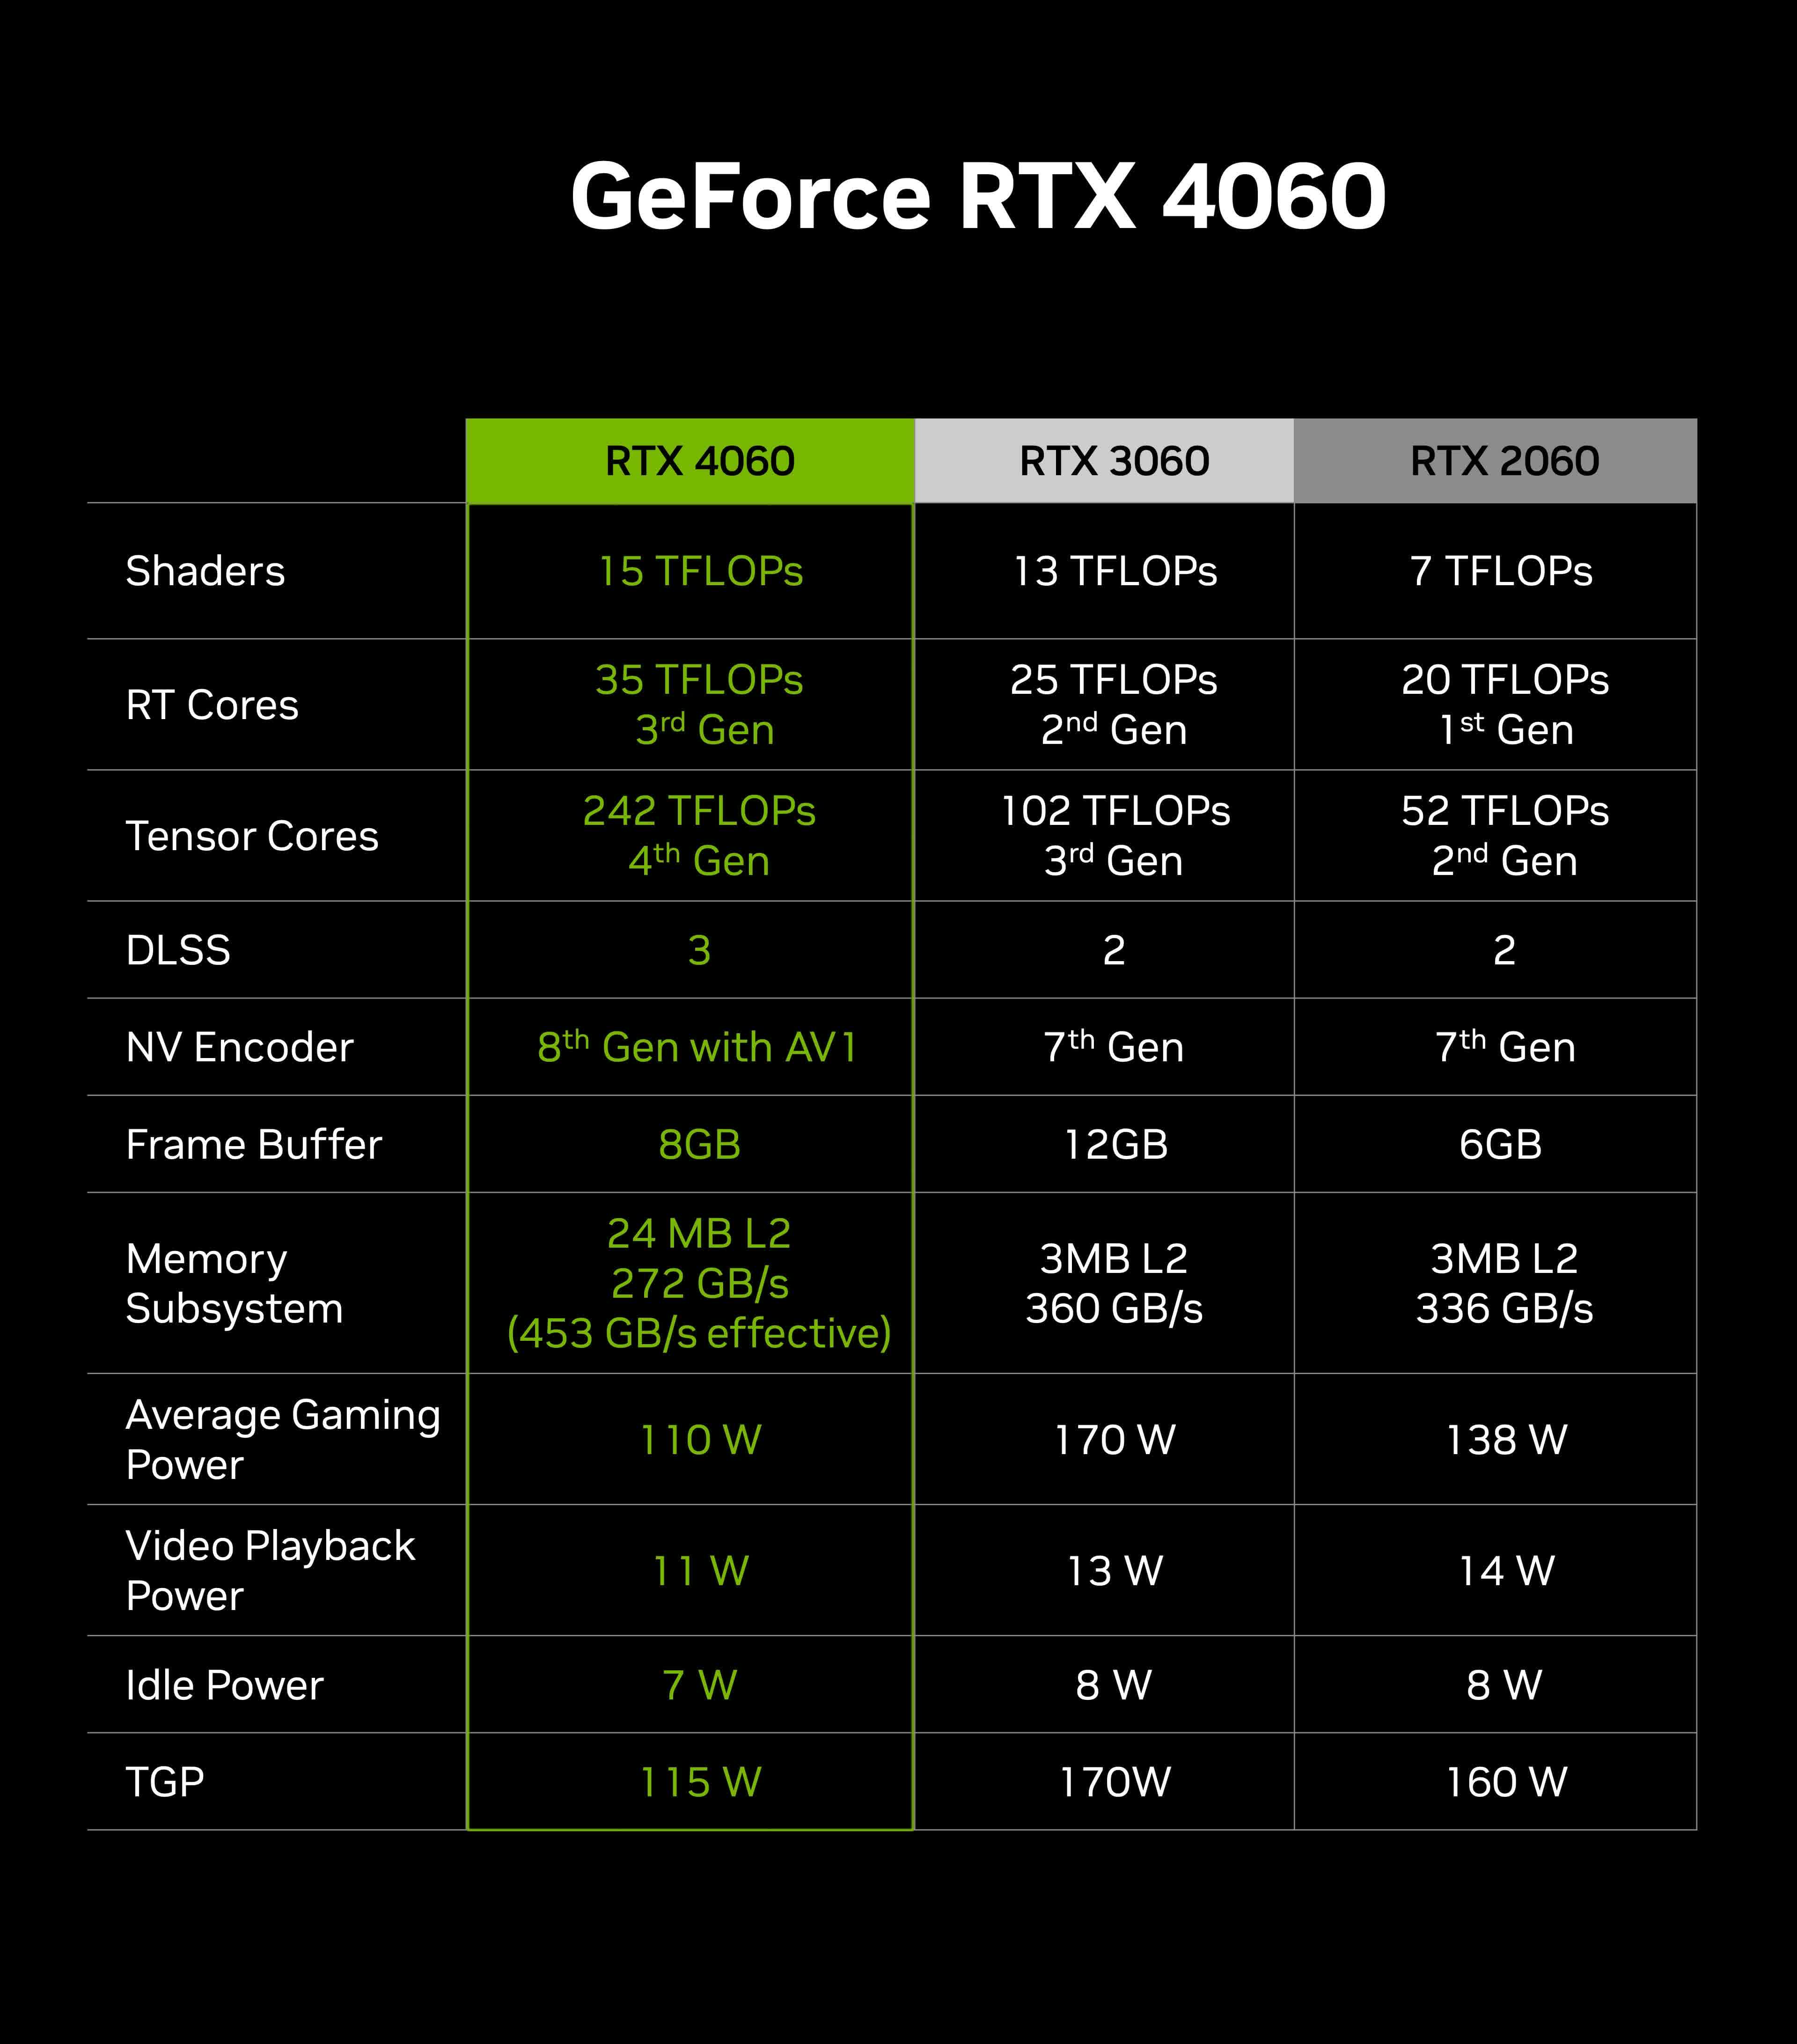 Nvidia is giving away RTX 4060, 4060 Ti, 4080, and 4090 cards this summer